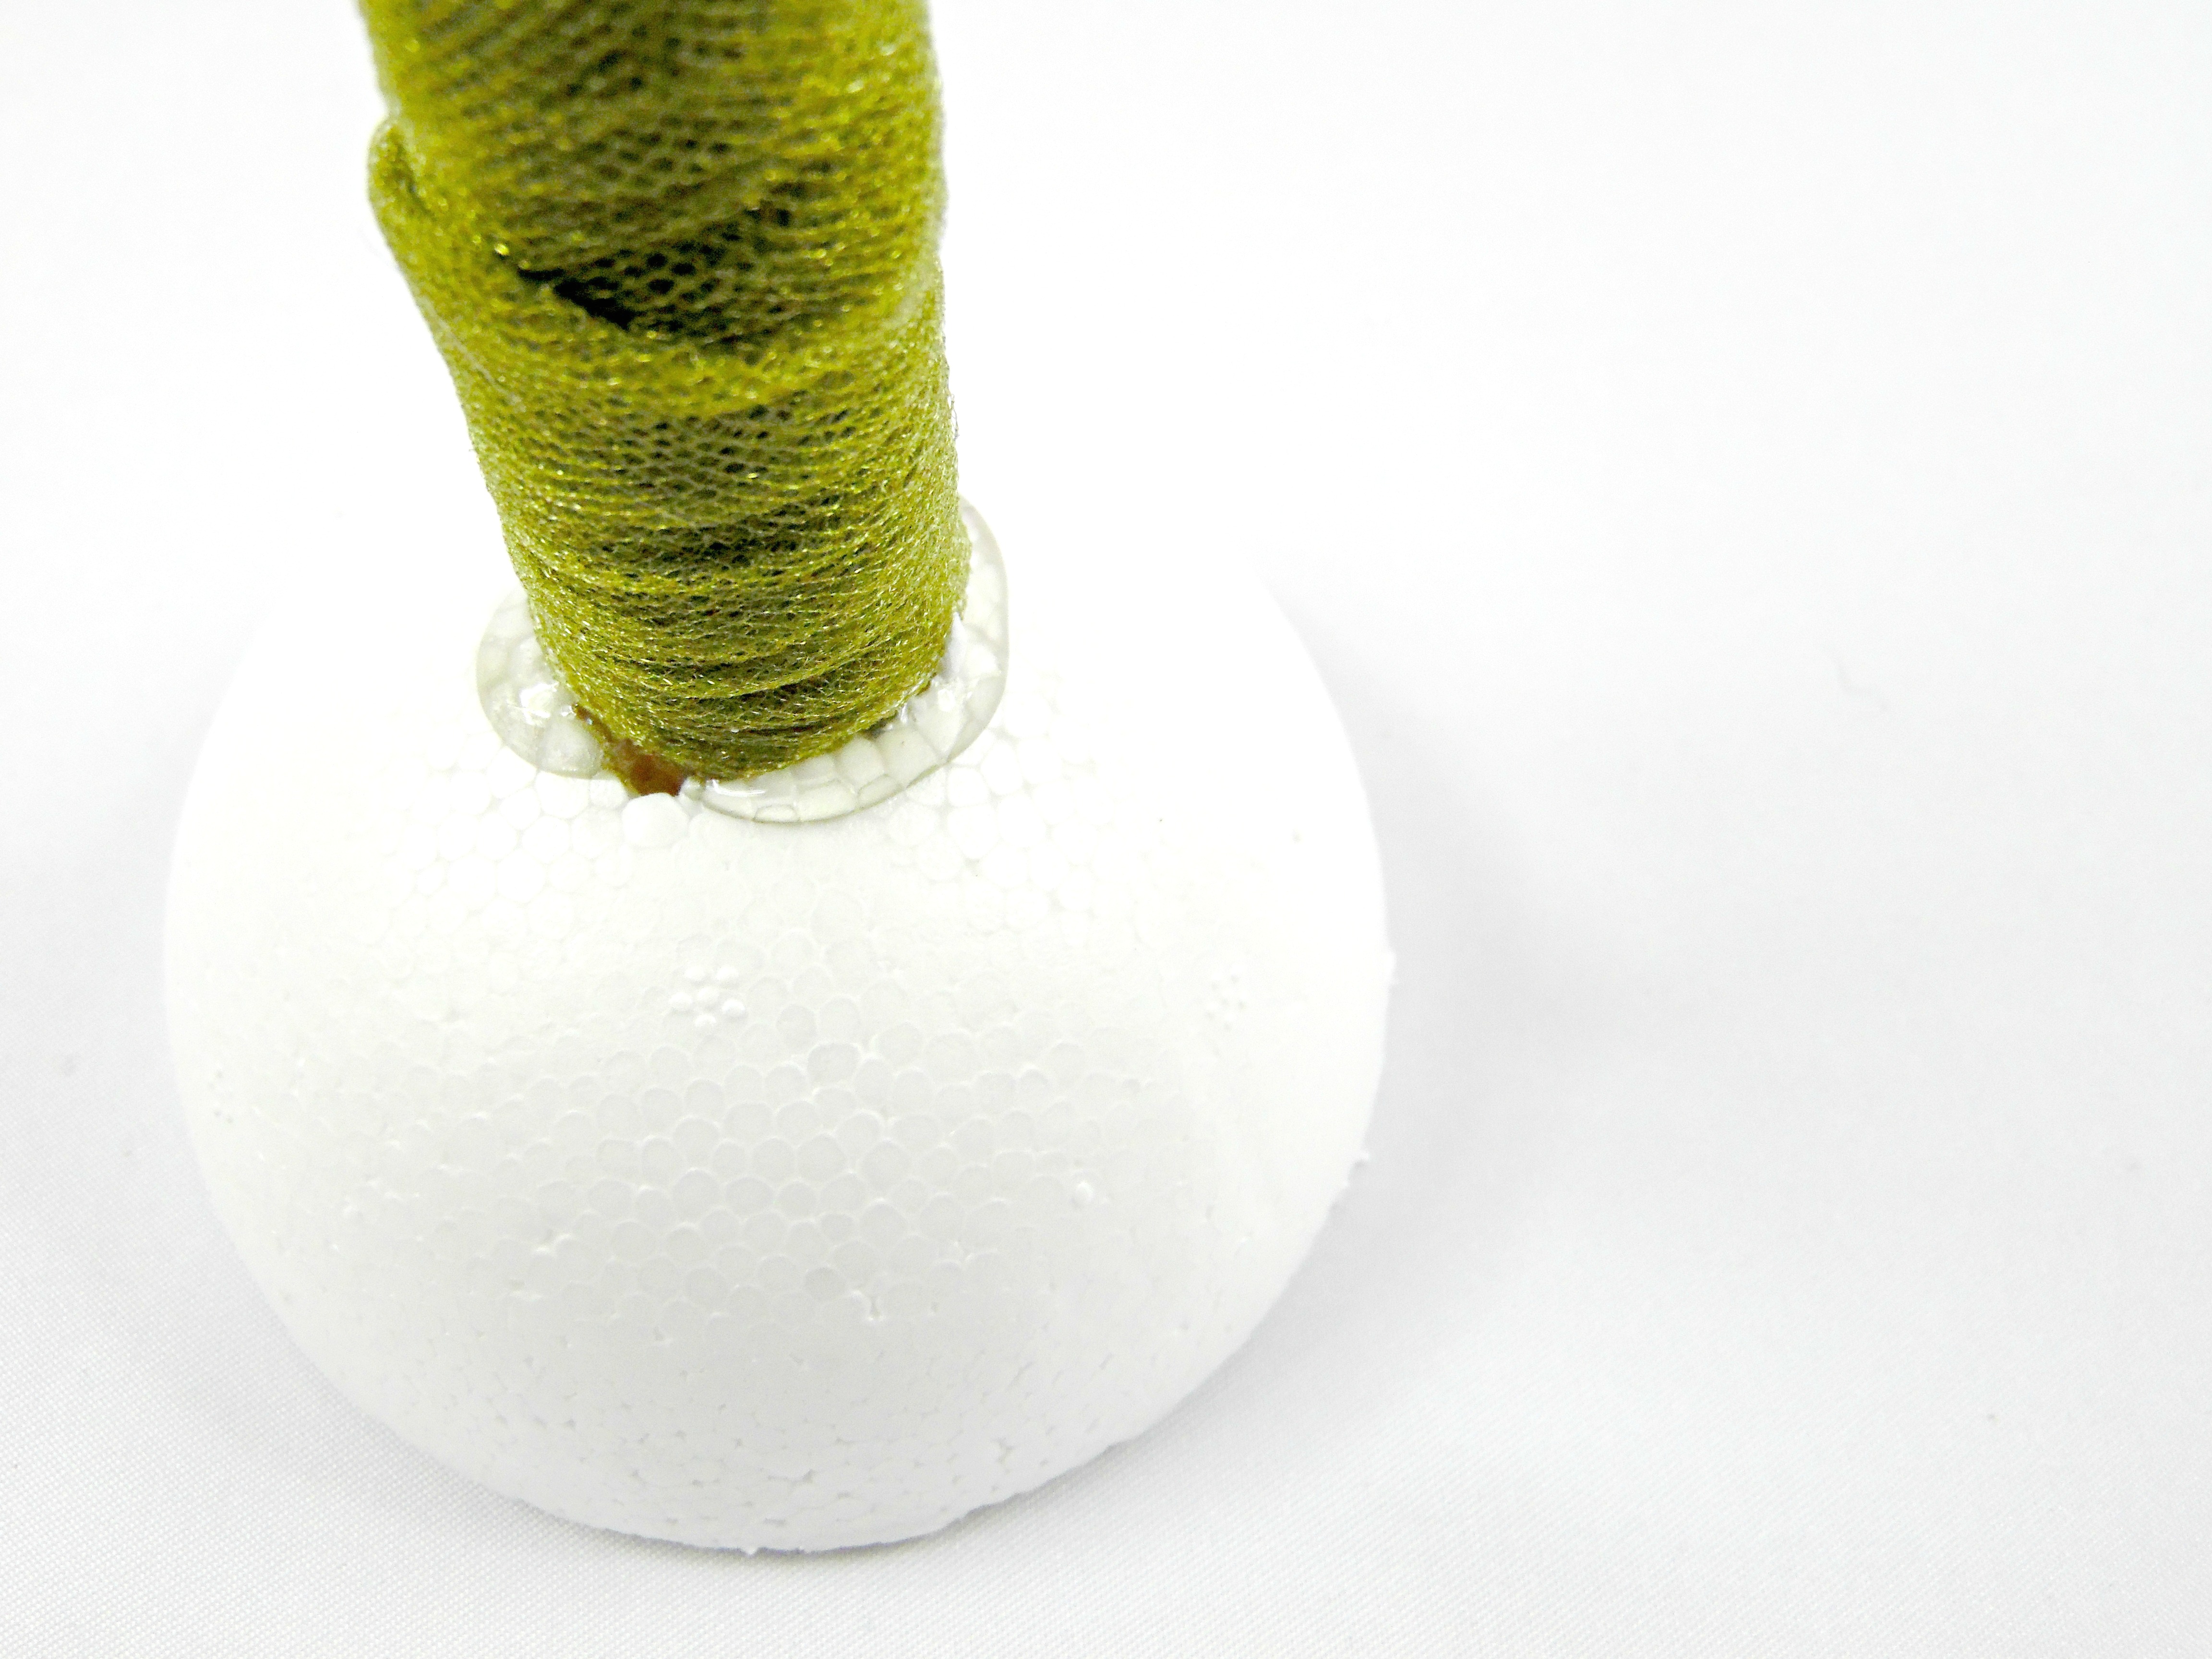 To attach the foam ball to the wooden dowel, you’ll need craft glue like hot glue. 